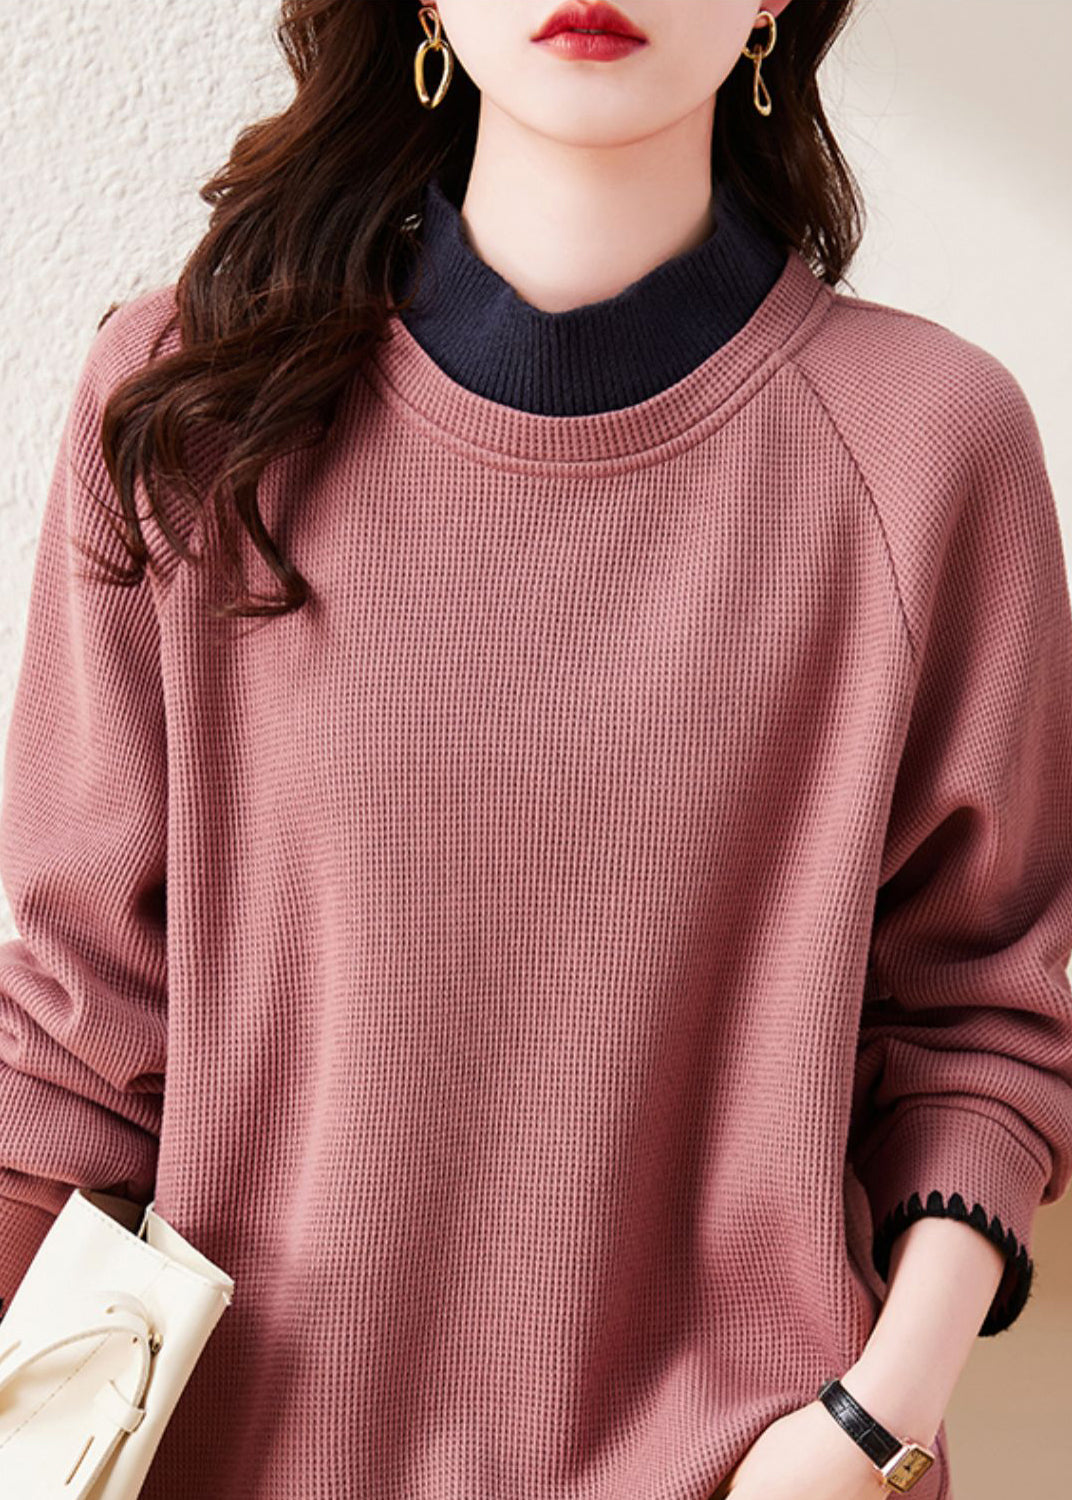 Stylish Rubber Red Stand Collar Patchwork Cotton Pullover Sweatshirt Spring